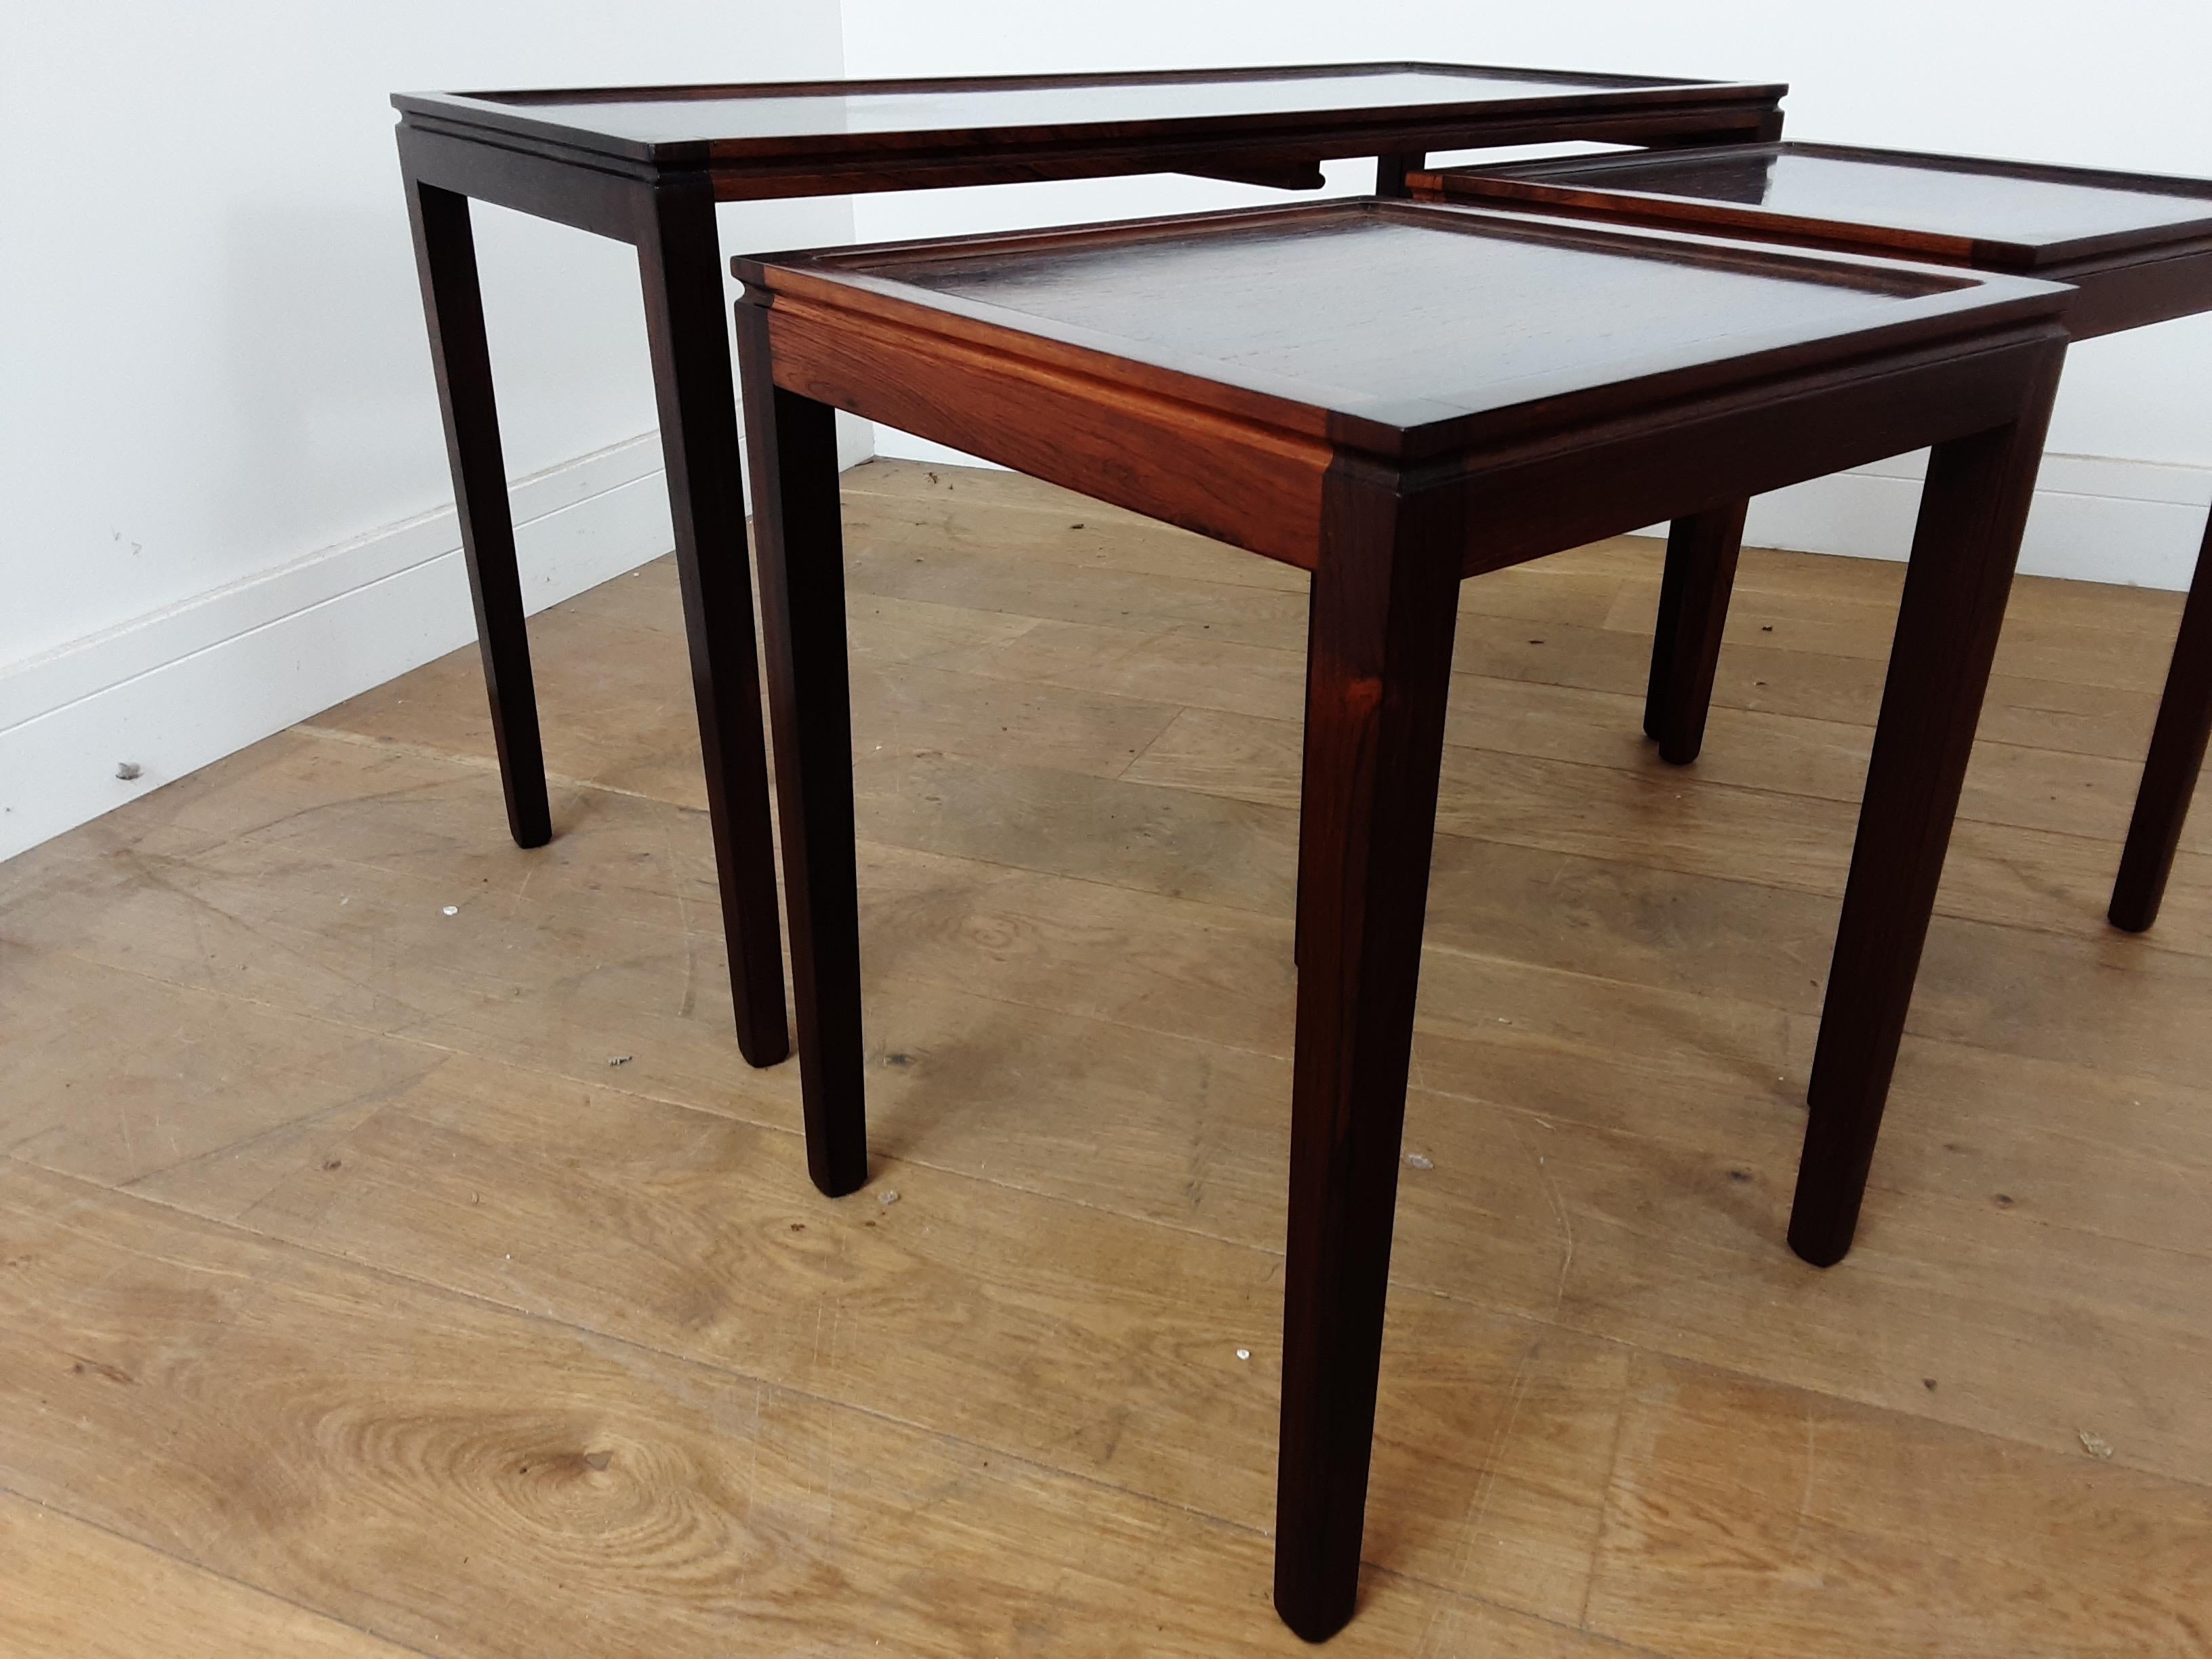 Midcentury Nest of Tables in Deep Brown Figured Rosewood circa 1960 from Denmark For Sale 6